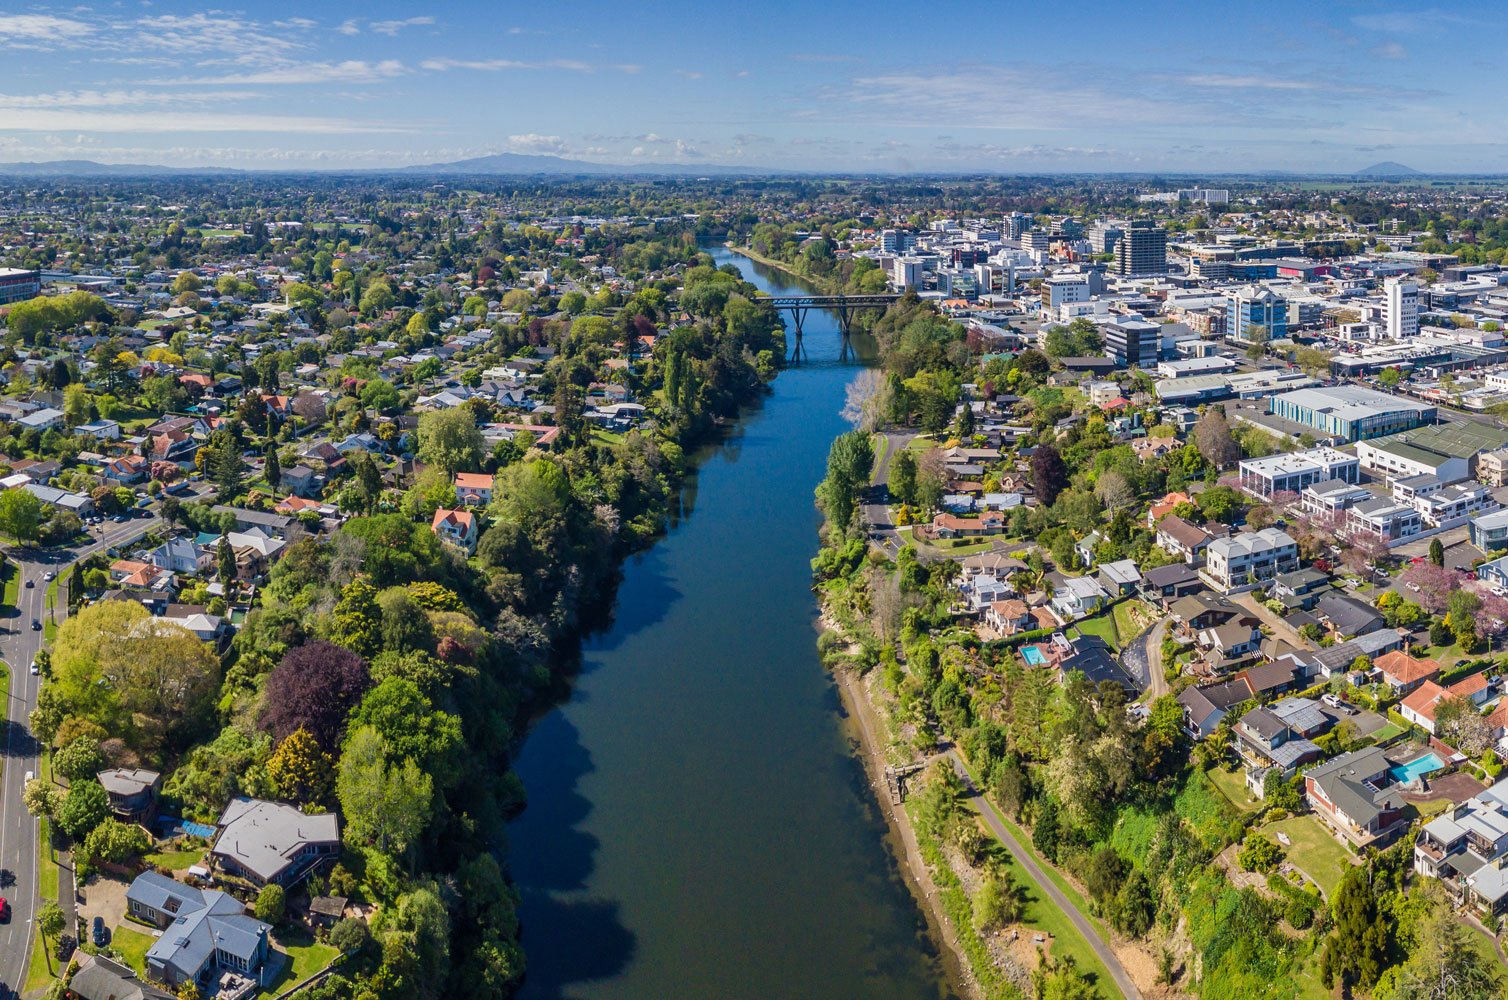 Entire town view from the sky that shows the Waikato river and all the surrounding properties